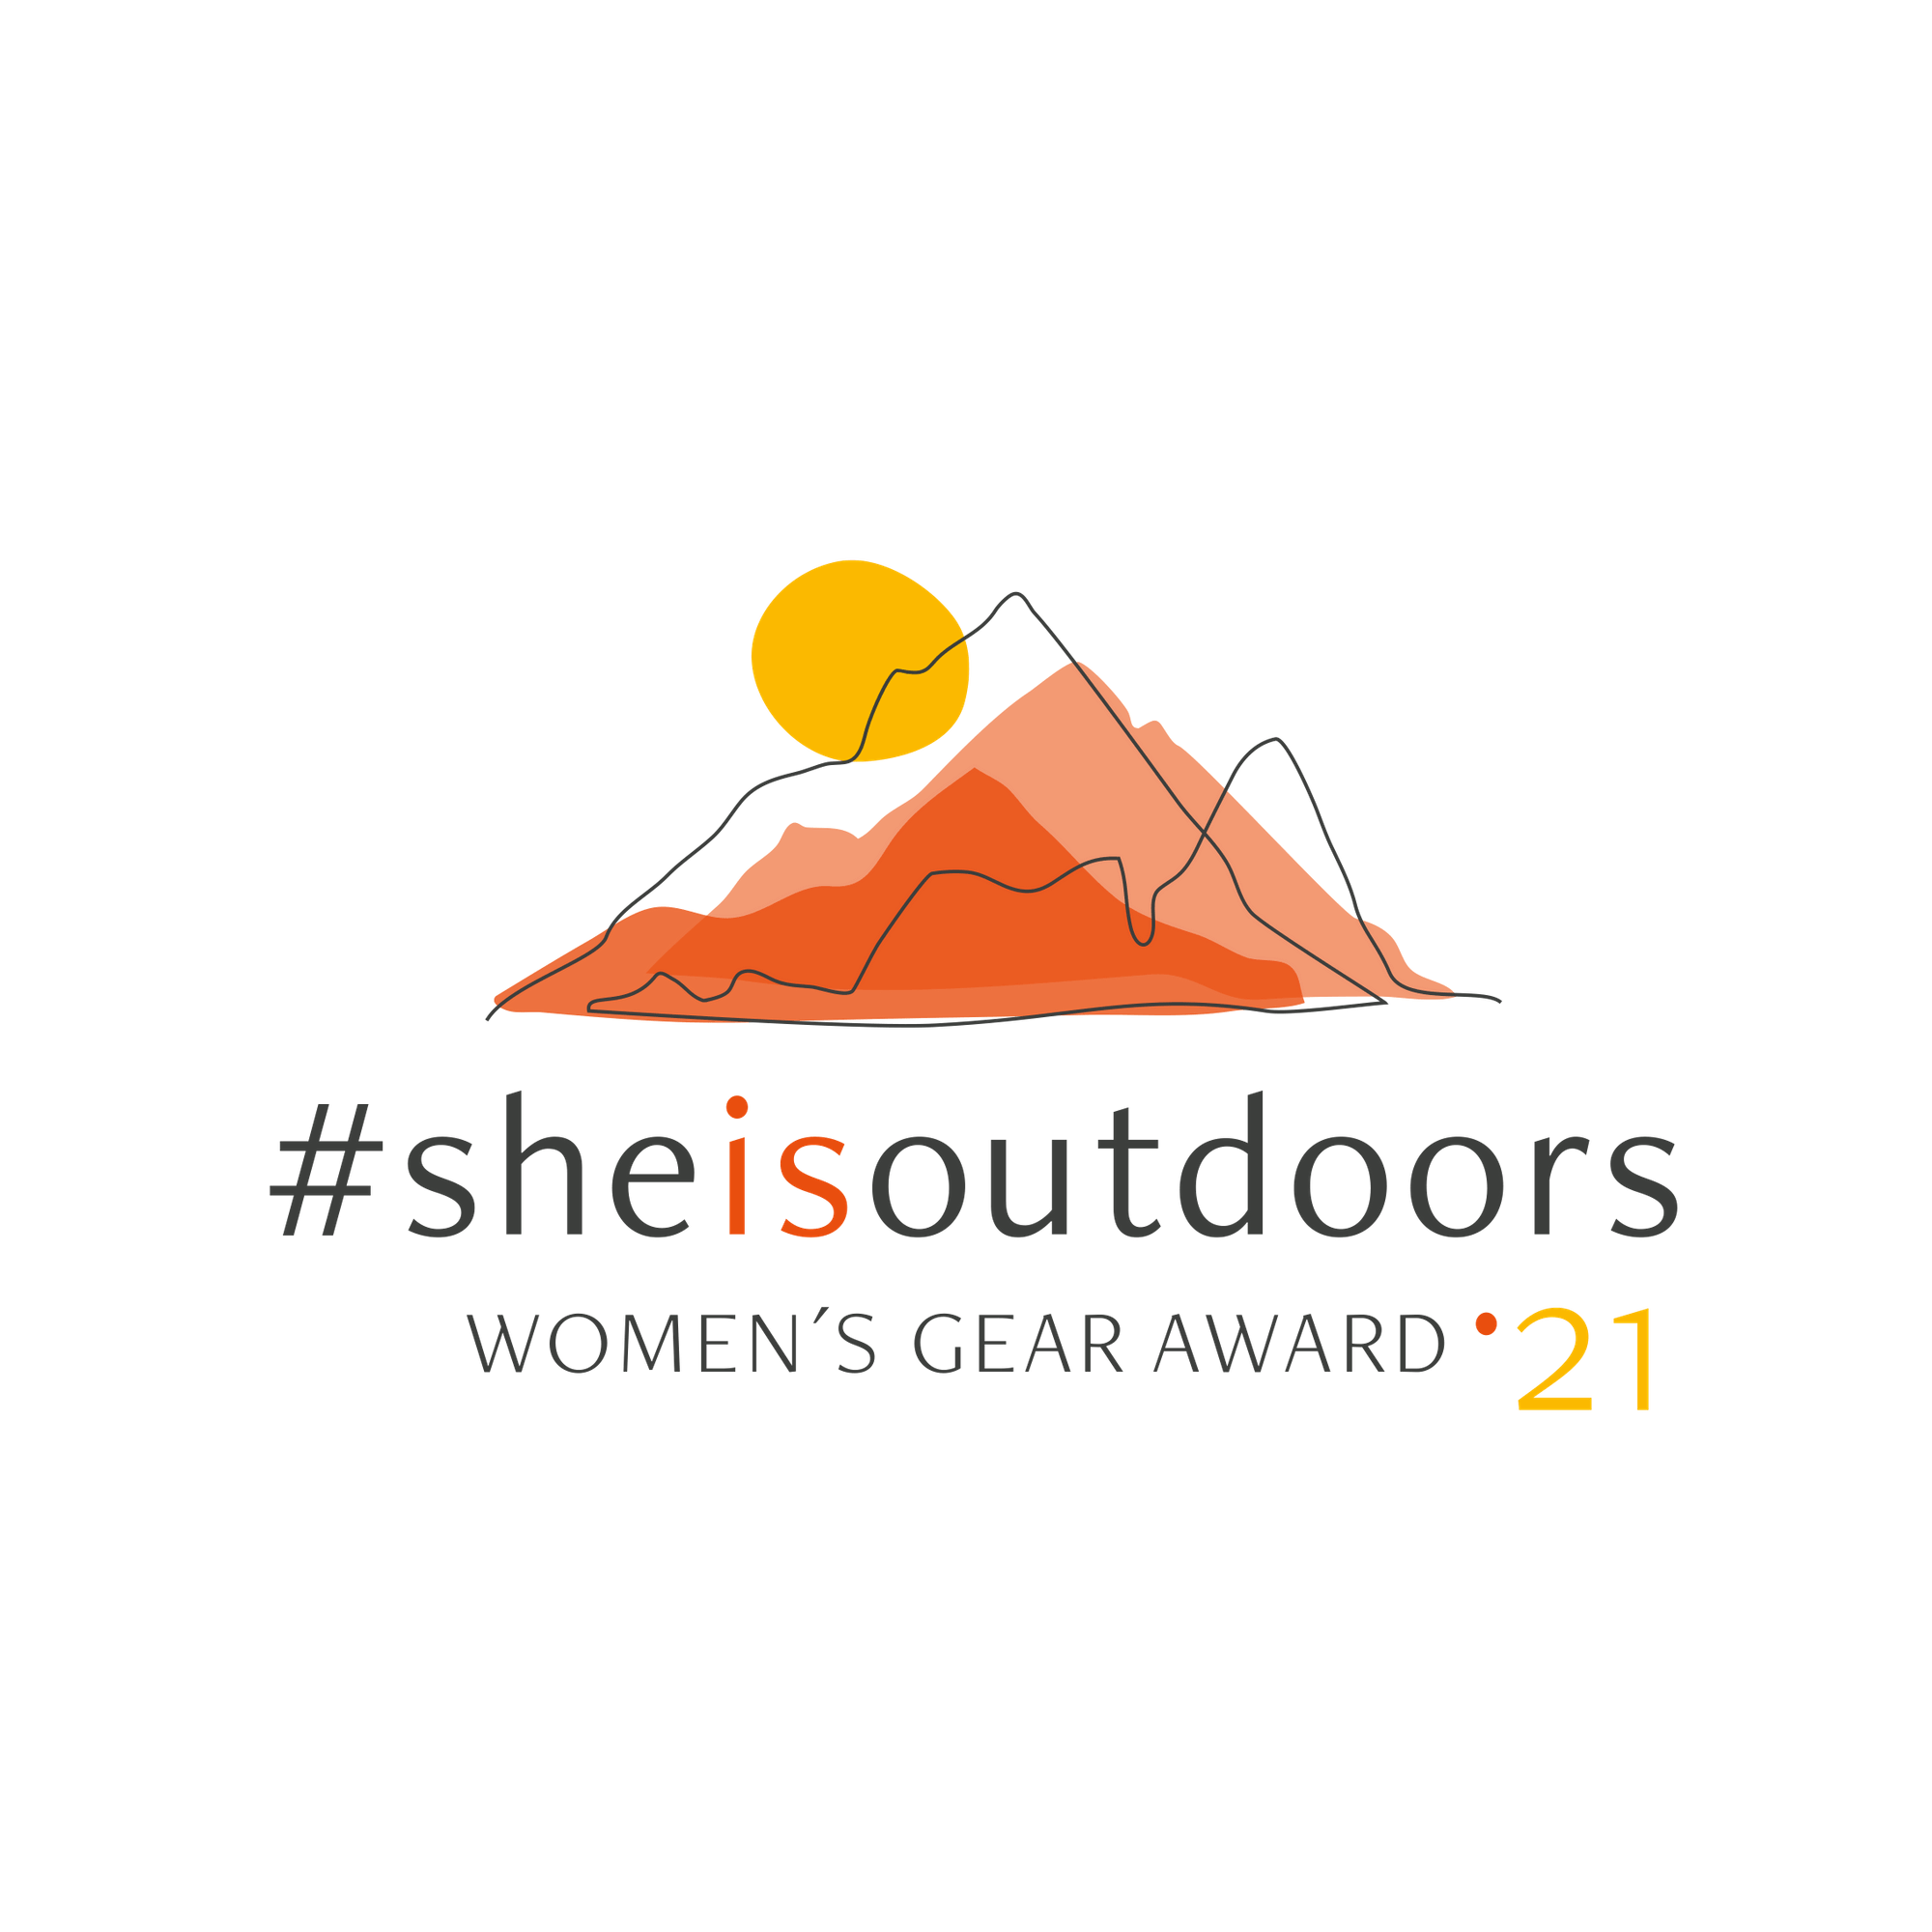 We are part of the #sheisoutdoors Women's Gear Award. ☀